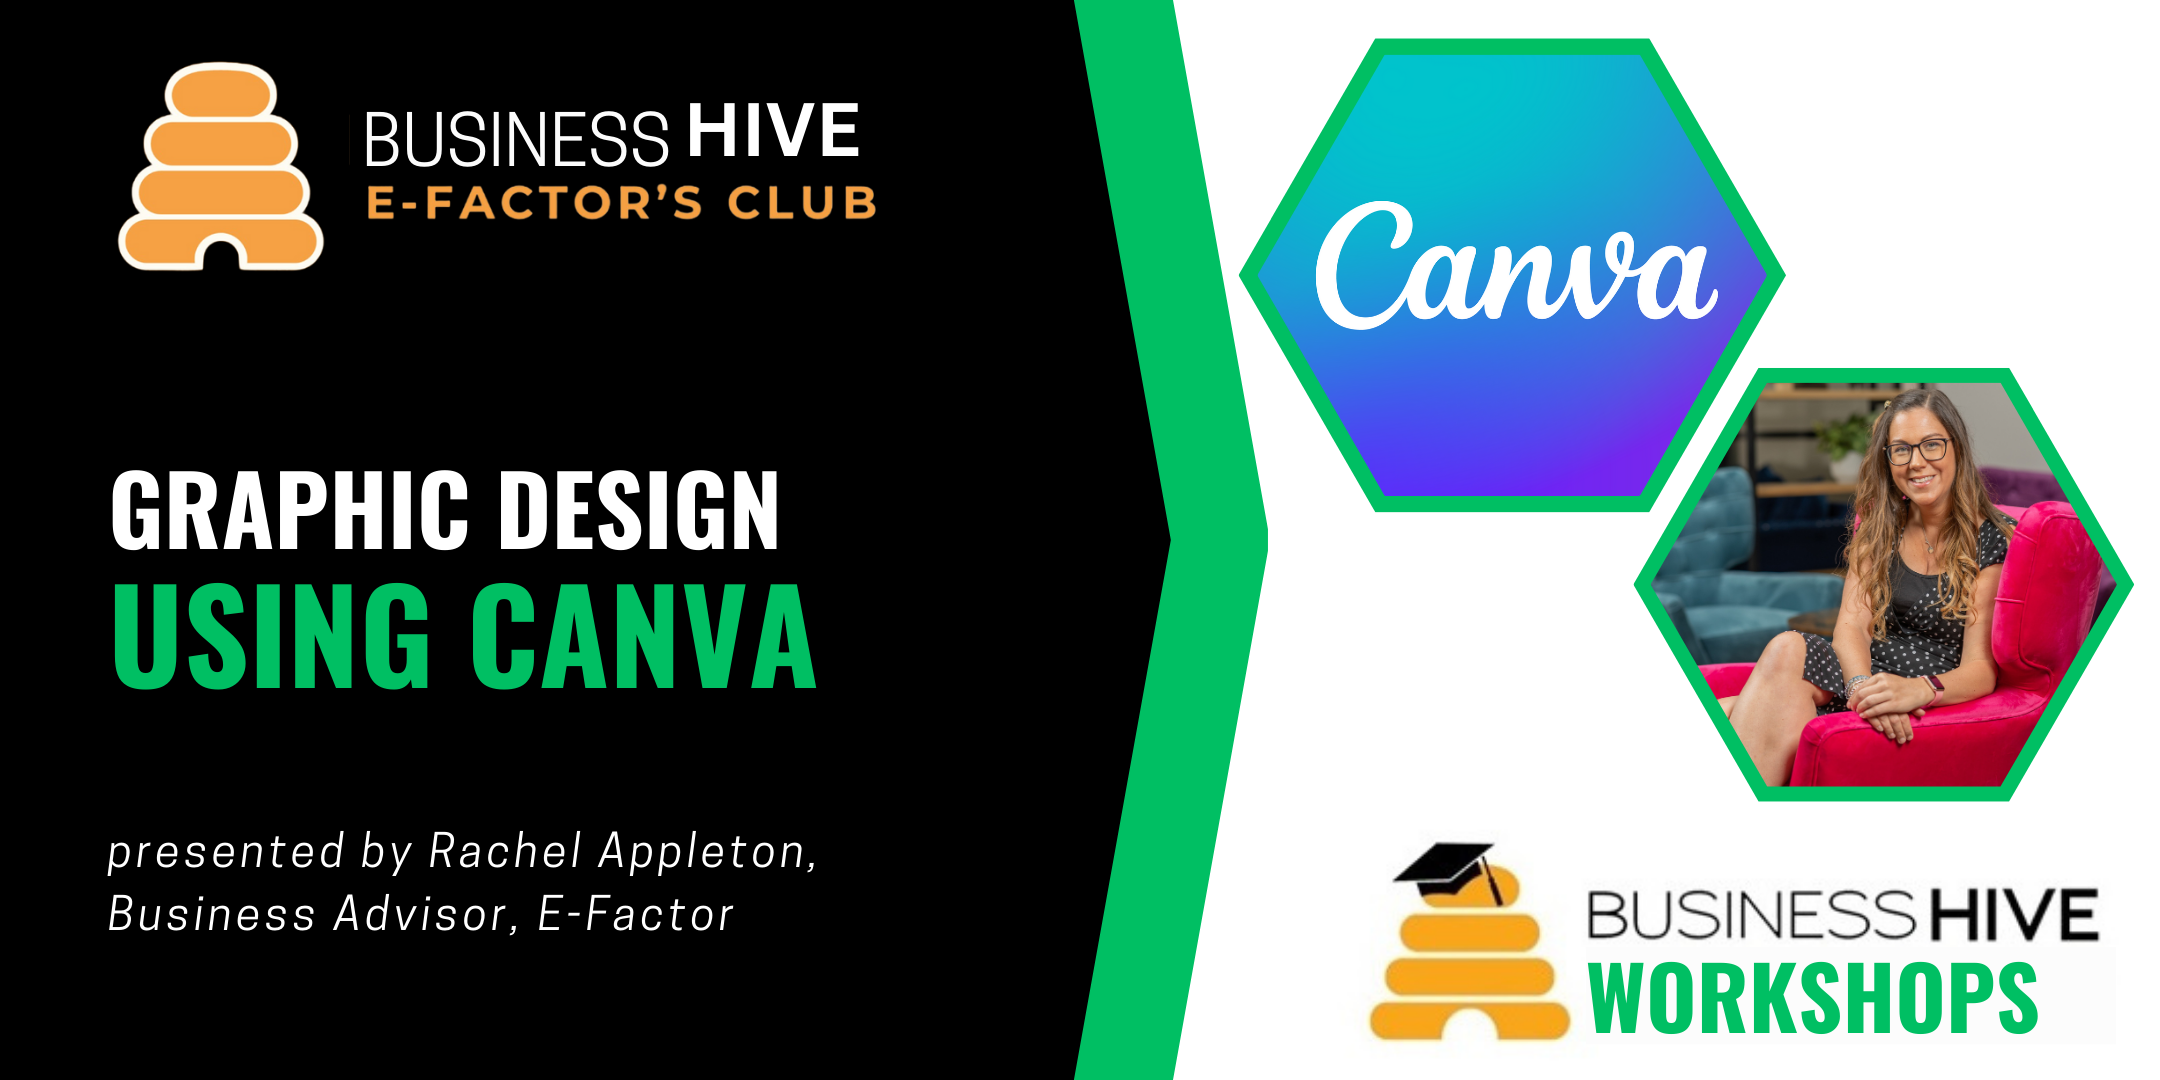 Promotional graphic for an Introduction workshop on design using Canva, featuring Rachel Appleton as the presenter.